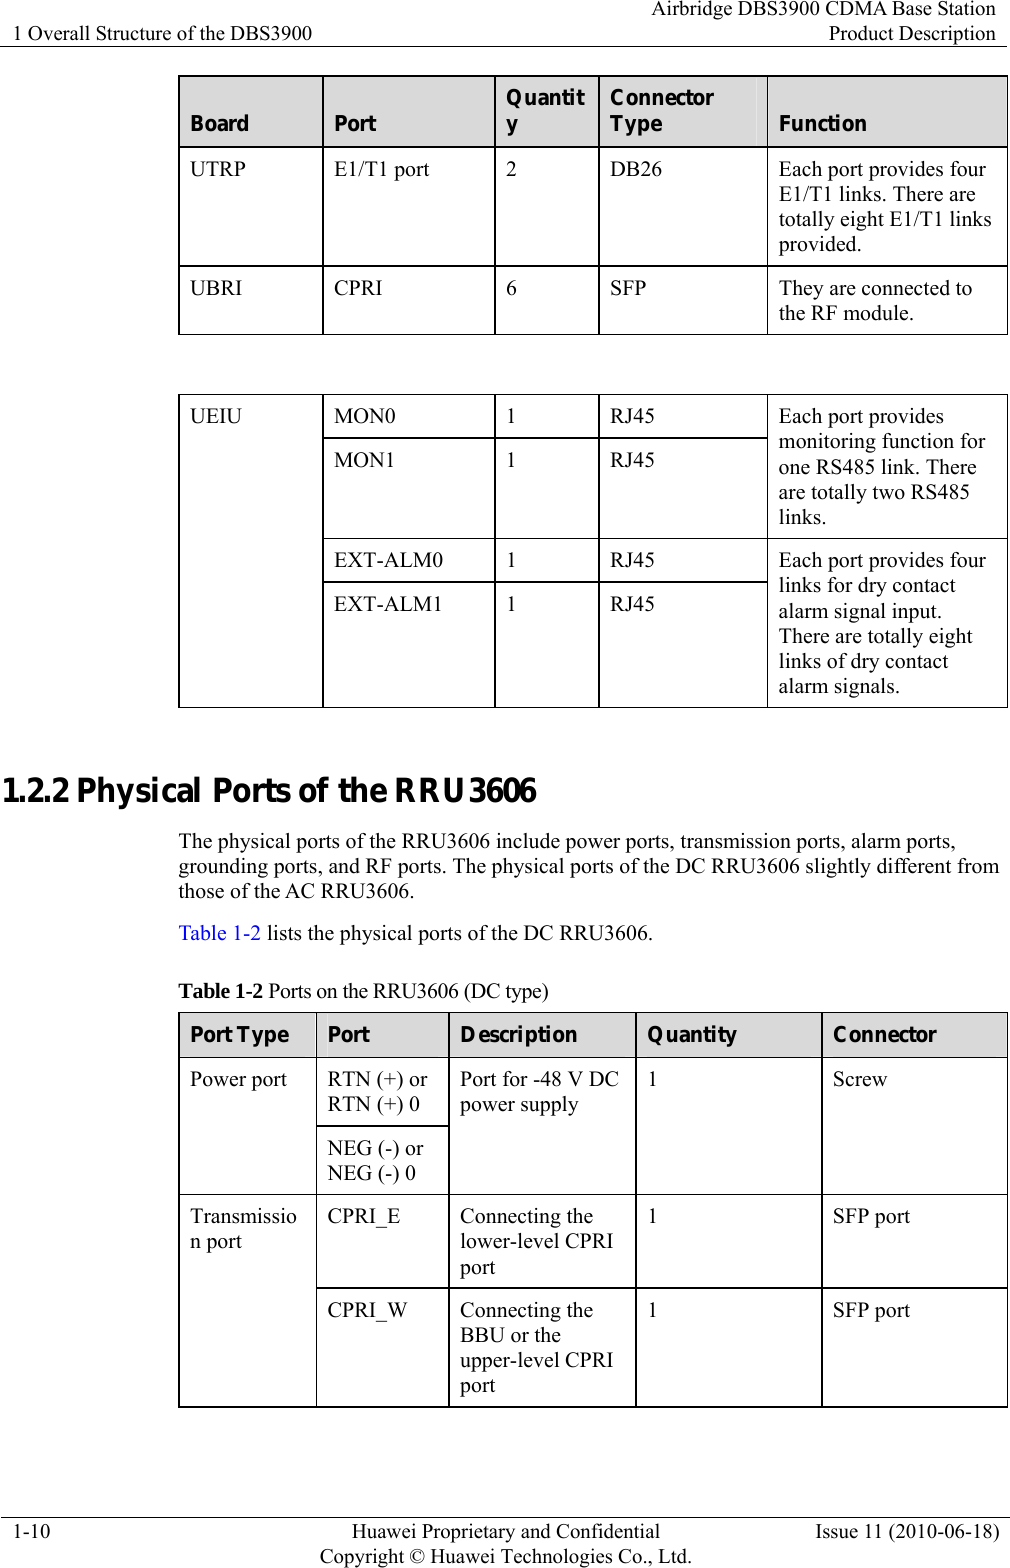 1 Overall Structure of the DBS3900 Airbridge DBS3900 CDMA Base StationProduct Description 1-10  Huawei Proprietary and Confidential     Copyright © Huawei Technologies Co., Ltd.Issue 11 (2010-06-18) Board  Port  Quantity  Connector Type  Function UTRP  E1/T1 port  2  DB26  Each port provides four E1/T1 links. There are totally eight E1/T1 links provided. UBRI  CPRI  6  SFP  They are connected to the RF module.    MON0 1 RJ45 MON1 1 RJ45 Each port provides monitoring function for one RS485 link. There are totally two RS485 links. EXT-ALM0 1  RJ45 UEIU EXT-ALM1 1  RJ45 Each port provides four links for dry contact alarm signal input. There are totally eight links of dry contact alarm signals.  1.2.2 Physical Ports of the RRU3606 The physical ports of the RRU3606 include power ports, transmission ports, alarm ports, grounding ports, and RF ports. The physical ports of the DC RRU3606 slightly different from those of the AC RRU3606. Table 1-2 lists the physical ports of the DC RRU3606. Table 1-2 Ports on the RRU3606 (DC type) Port Type    Port  Description  Quantity  Connector  RTN (+) or RTN (+) 0 Power port NEG (-) or NEG (-) 0 Port for -48 V DC power supply 1 Screw CPRI_E Connecting the lower-level CPRI port  1 SFP port Transmission port CPRI_W Connecting the BBU or the upper-level CPRI port  1 SFP port 